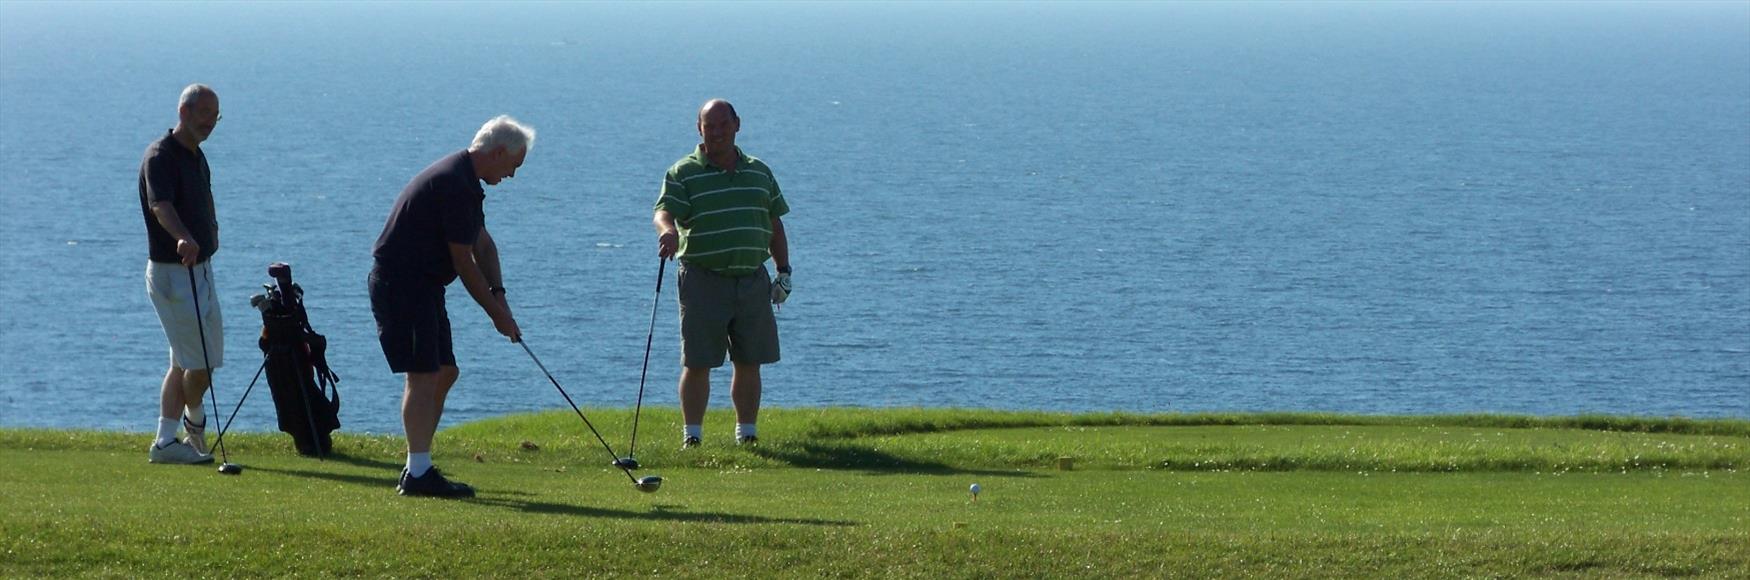 Golf Courses Overlooking the Sea